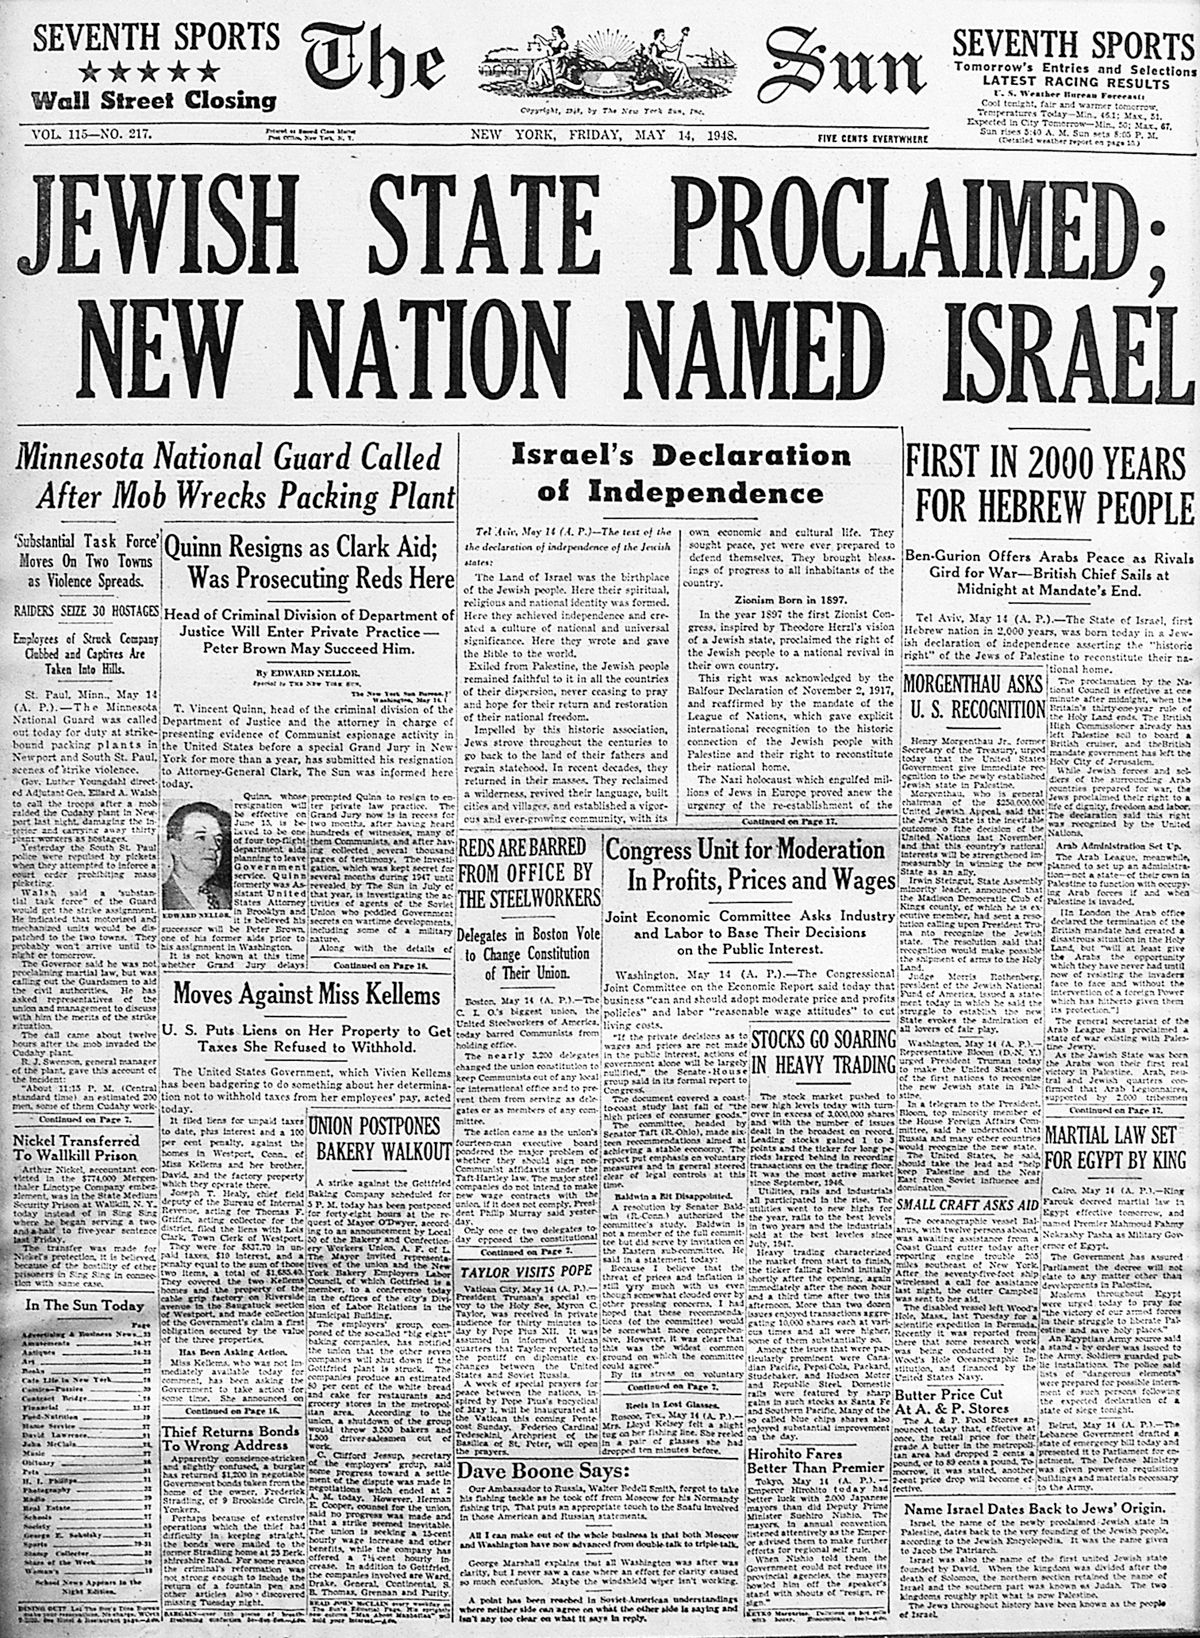 The (New York) Sun. “Jewish State Proclaimed; New Nation Named Israel ...